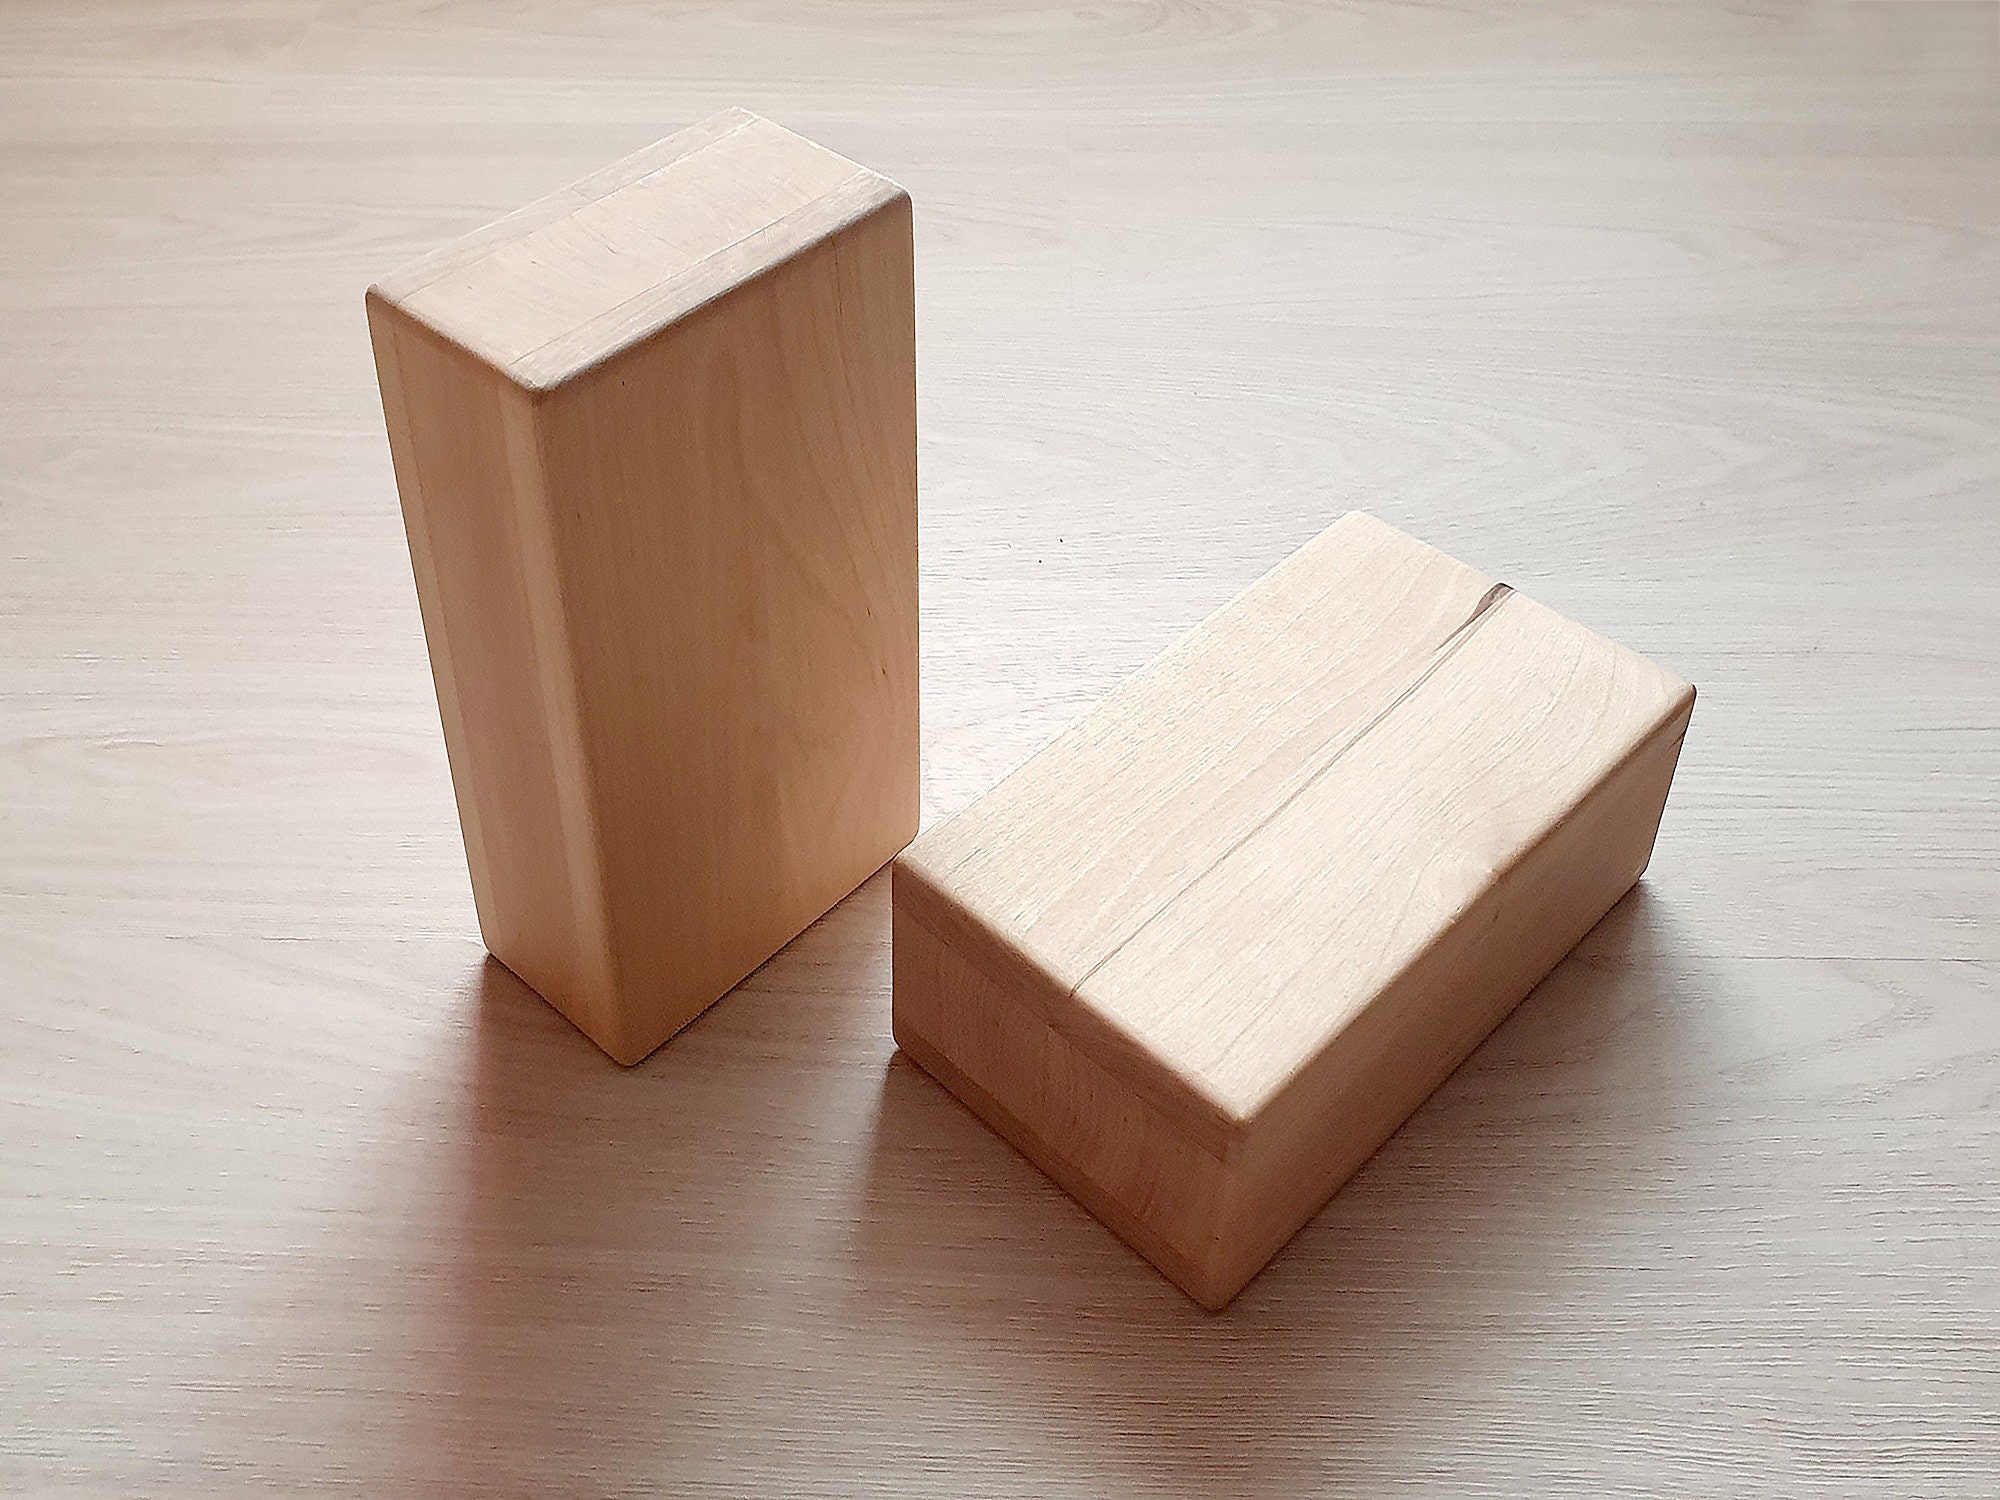 Pair of Wooden Yoga Blocks Standard Size 23x12x7.5 Cm for Support in Asanas  Props for Iyengar Yoga -  Canada